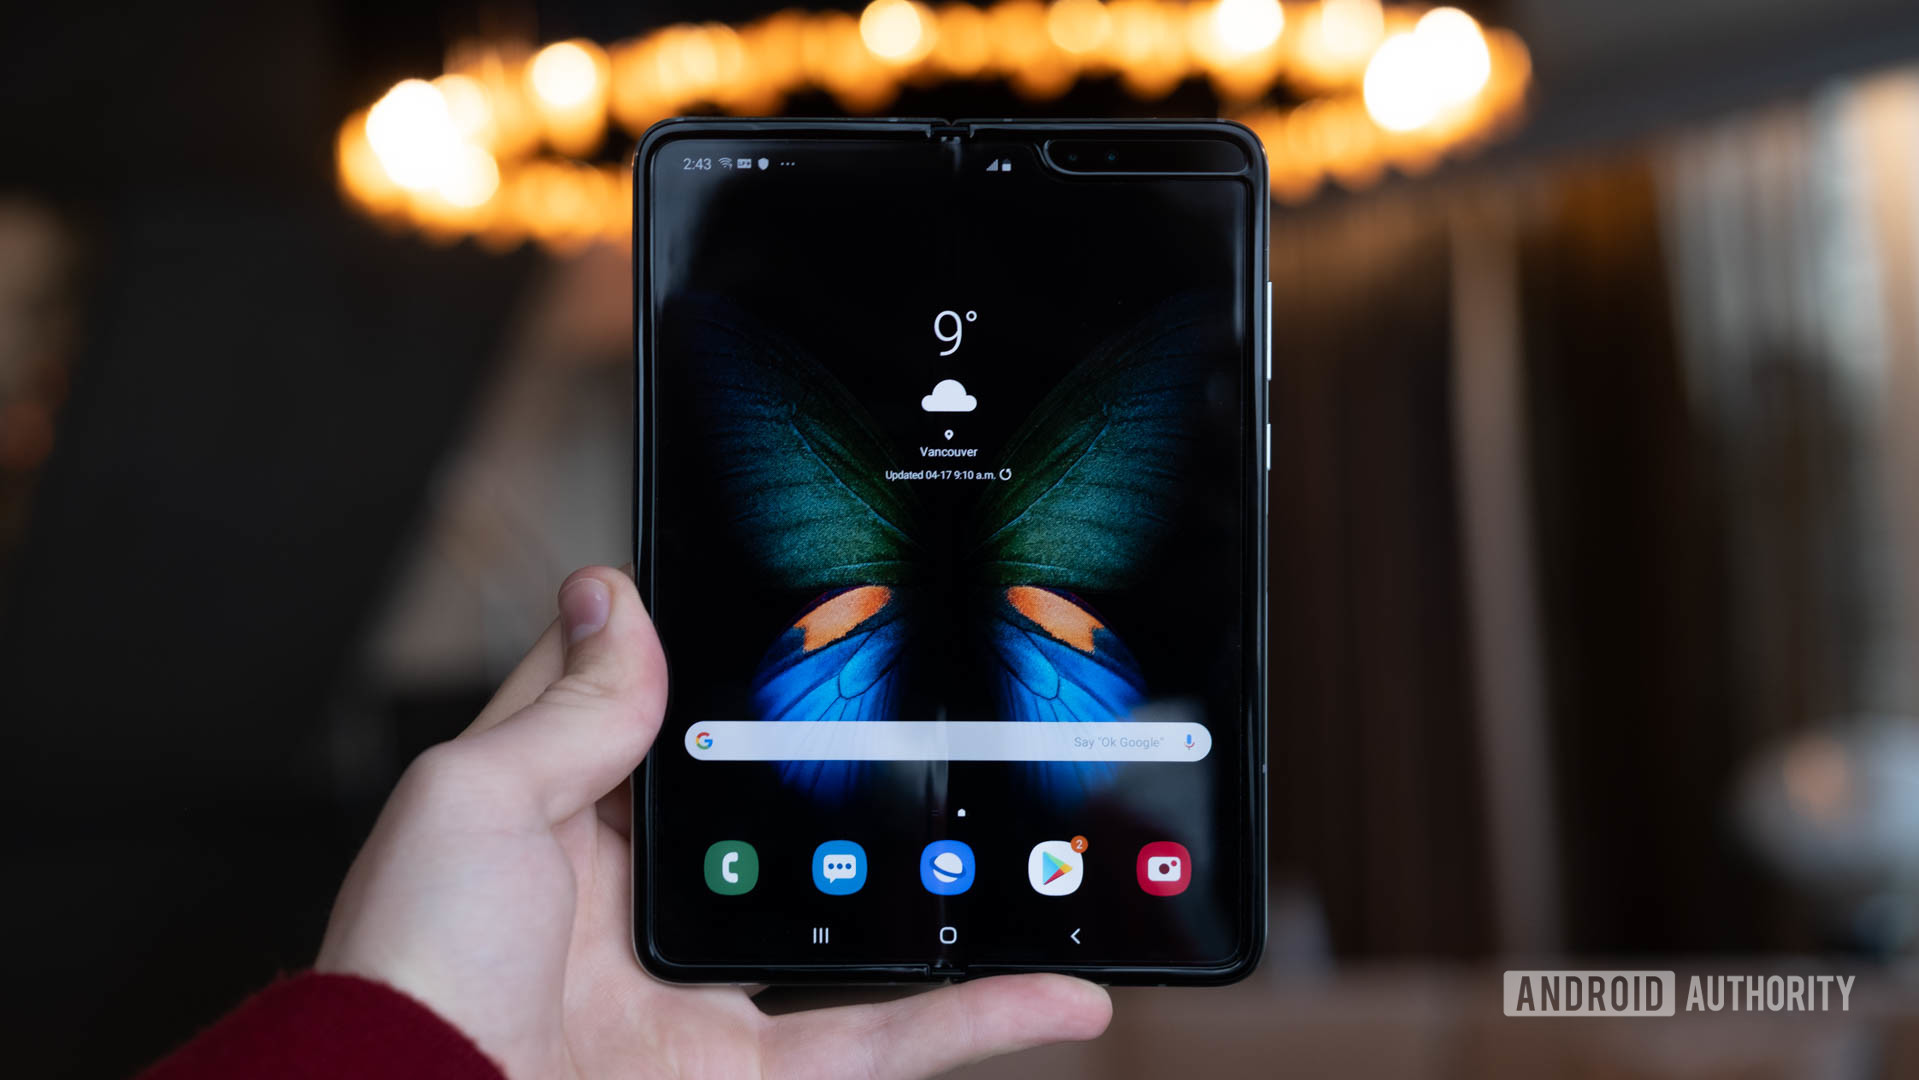 Tech components and products made in South Korea, such as the Galaxy Fold, could be at risk.